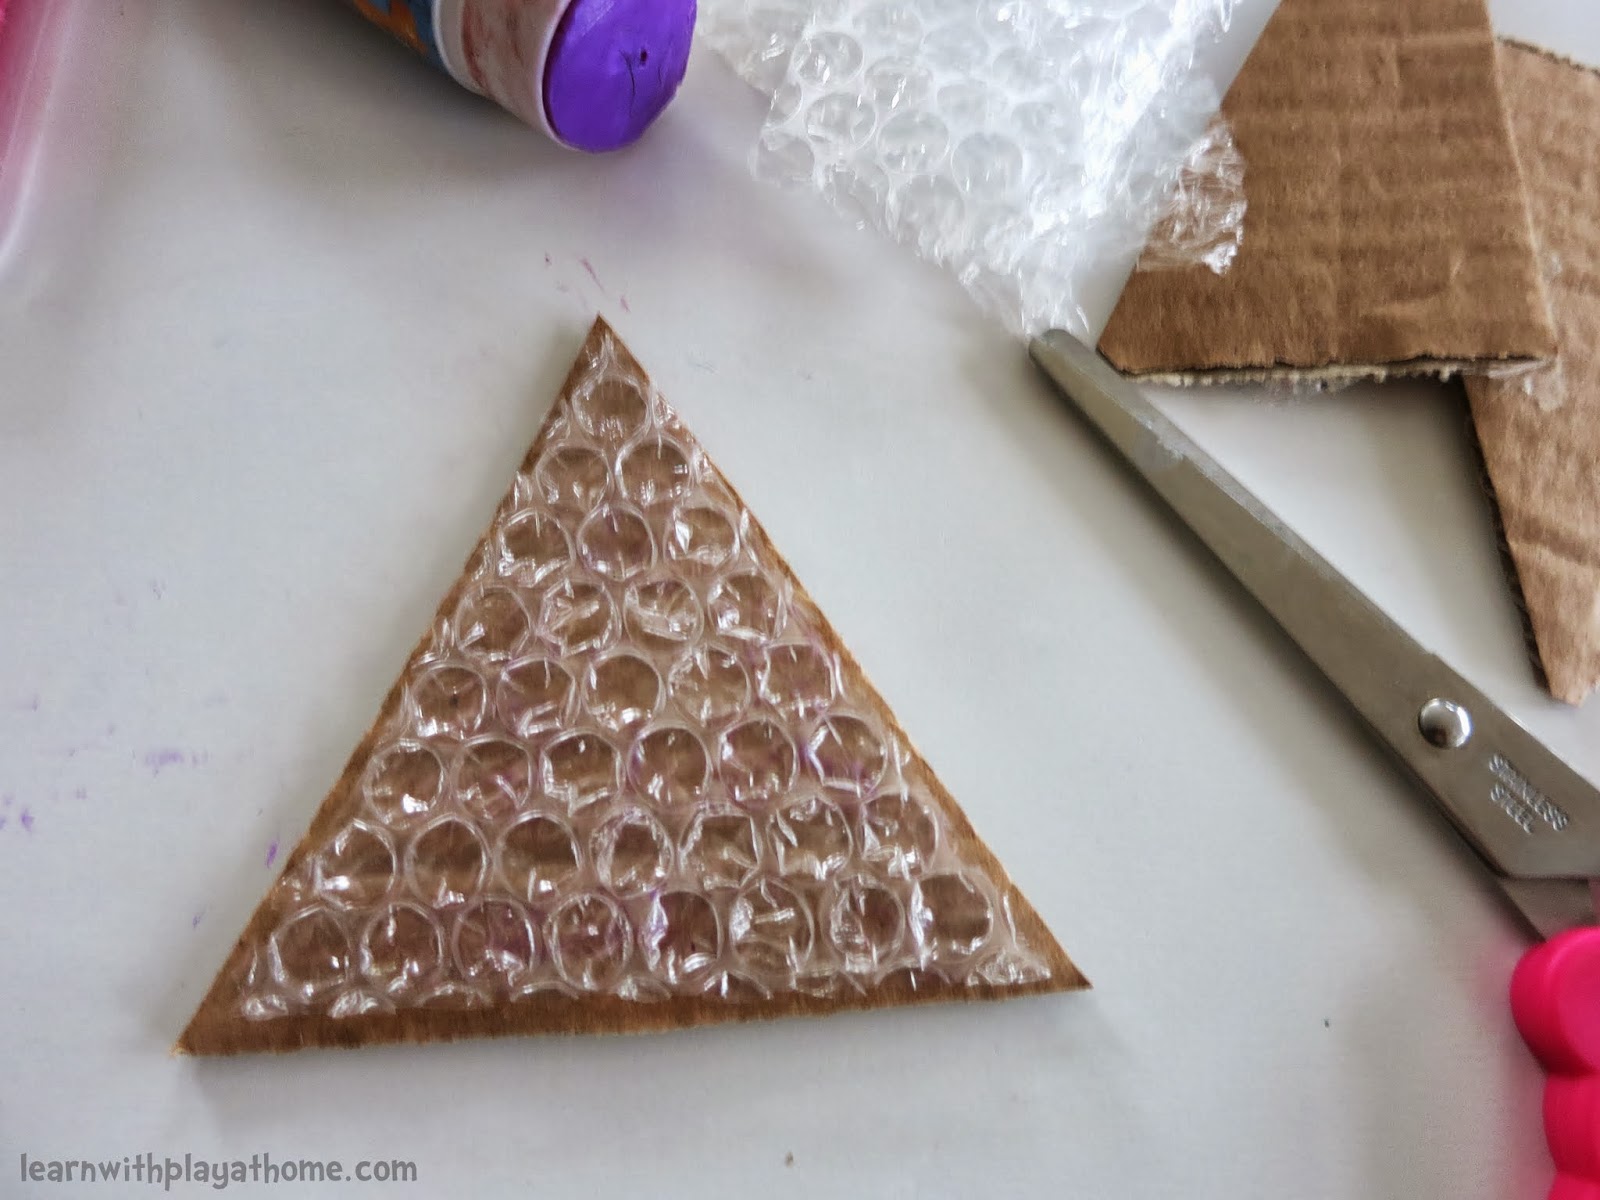 Learn with Play at Home: Simple Bubblewrap Christmas Cards made by kids